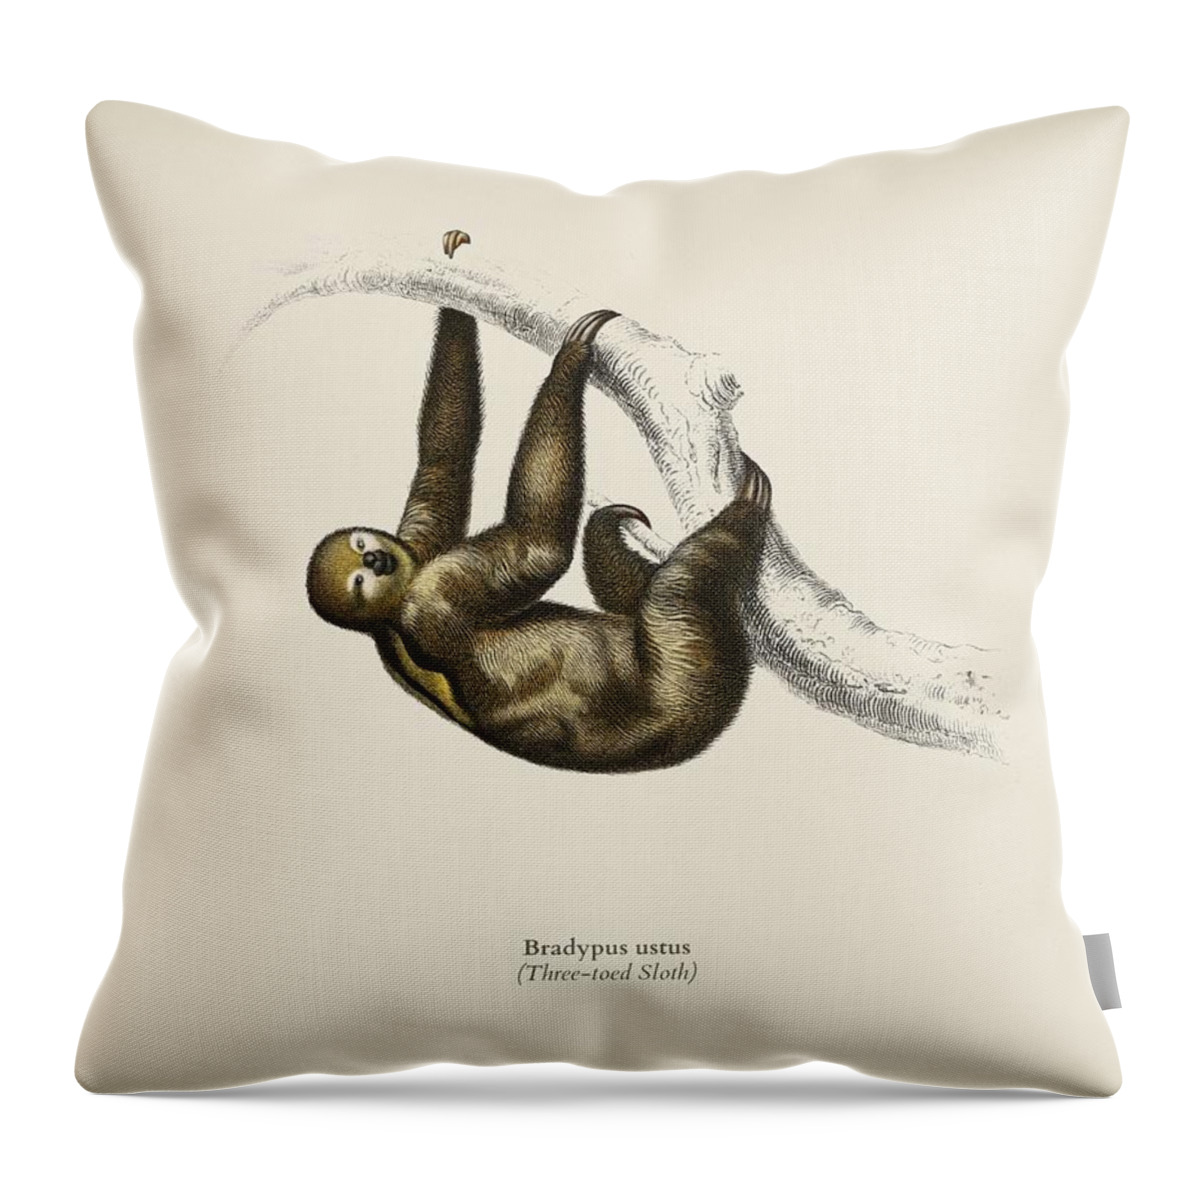 Sloth Throw Pillow featuring the painting Three-toed Sloth Bradypus ustus illustrated by Charles Dessalines D Orbigny 1806 1876 2 by Celestial Images